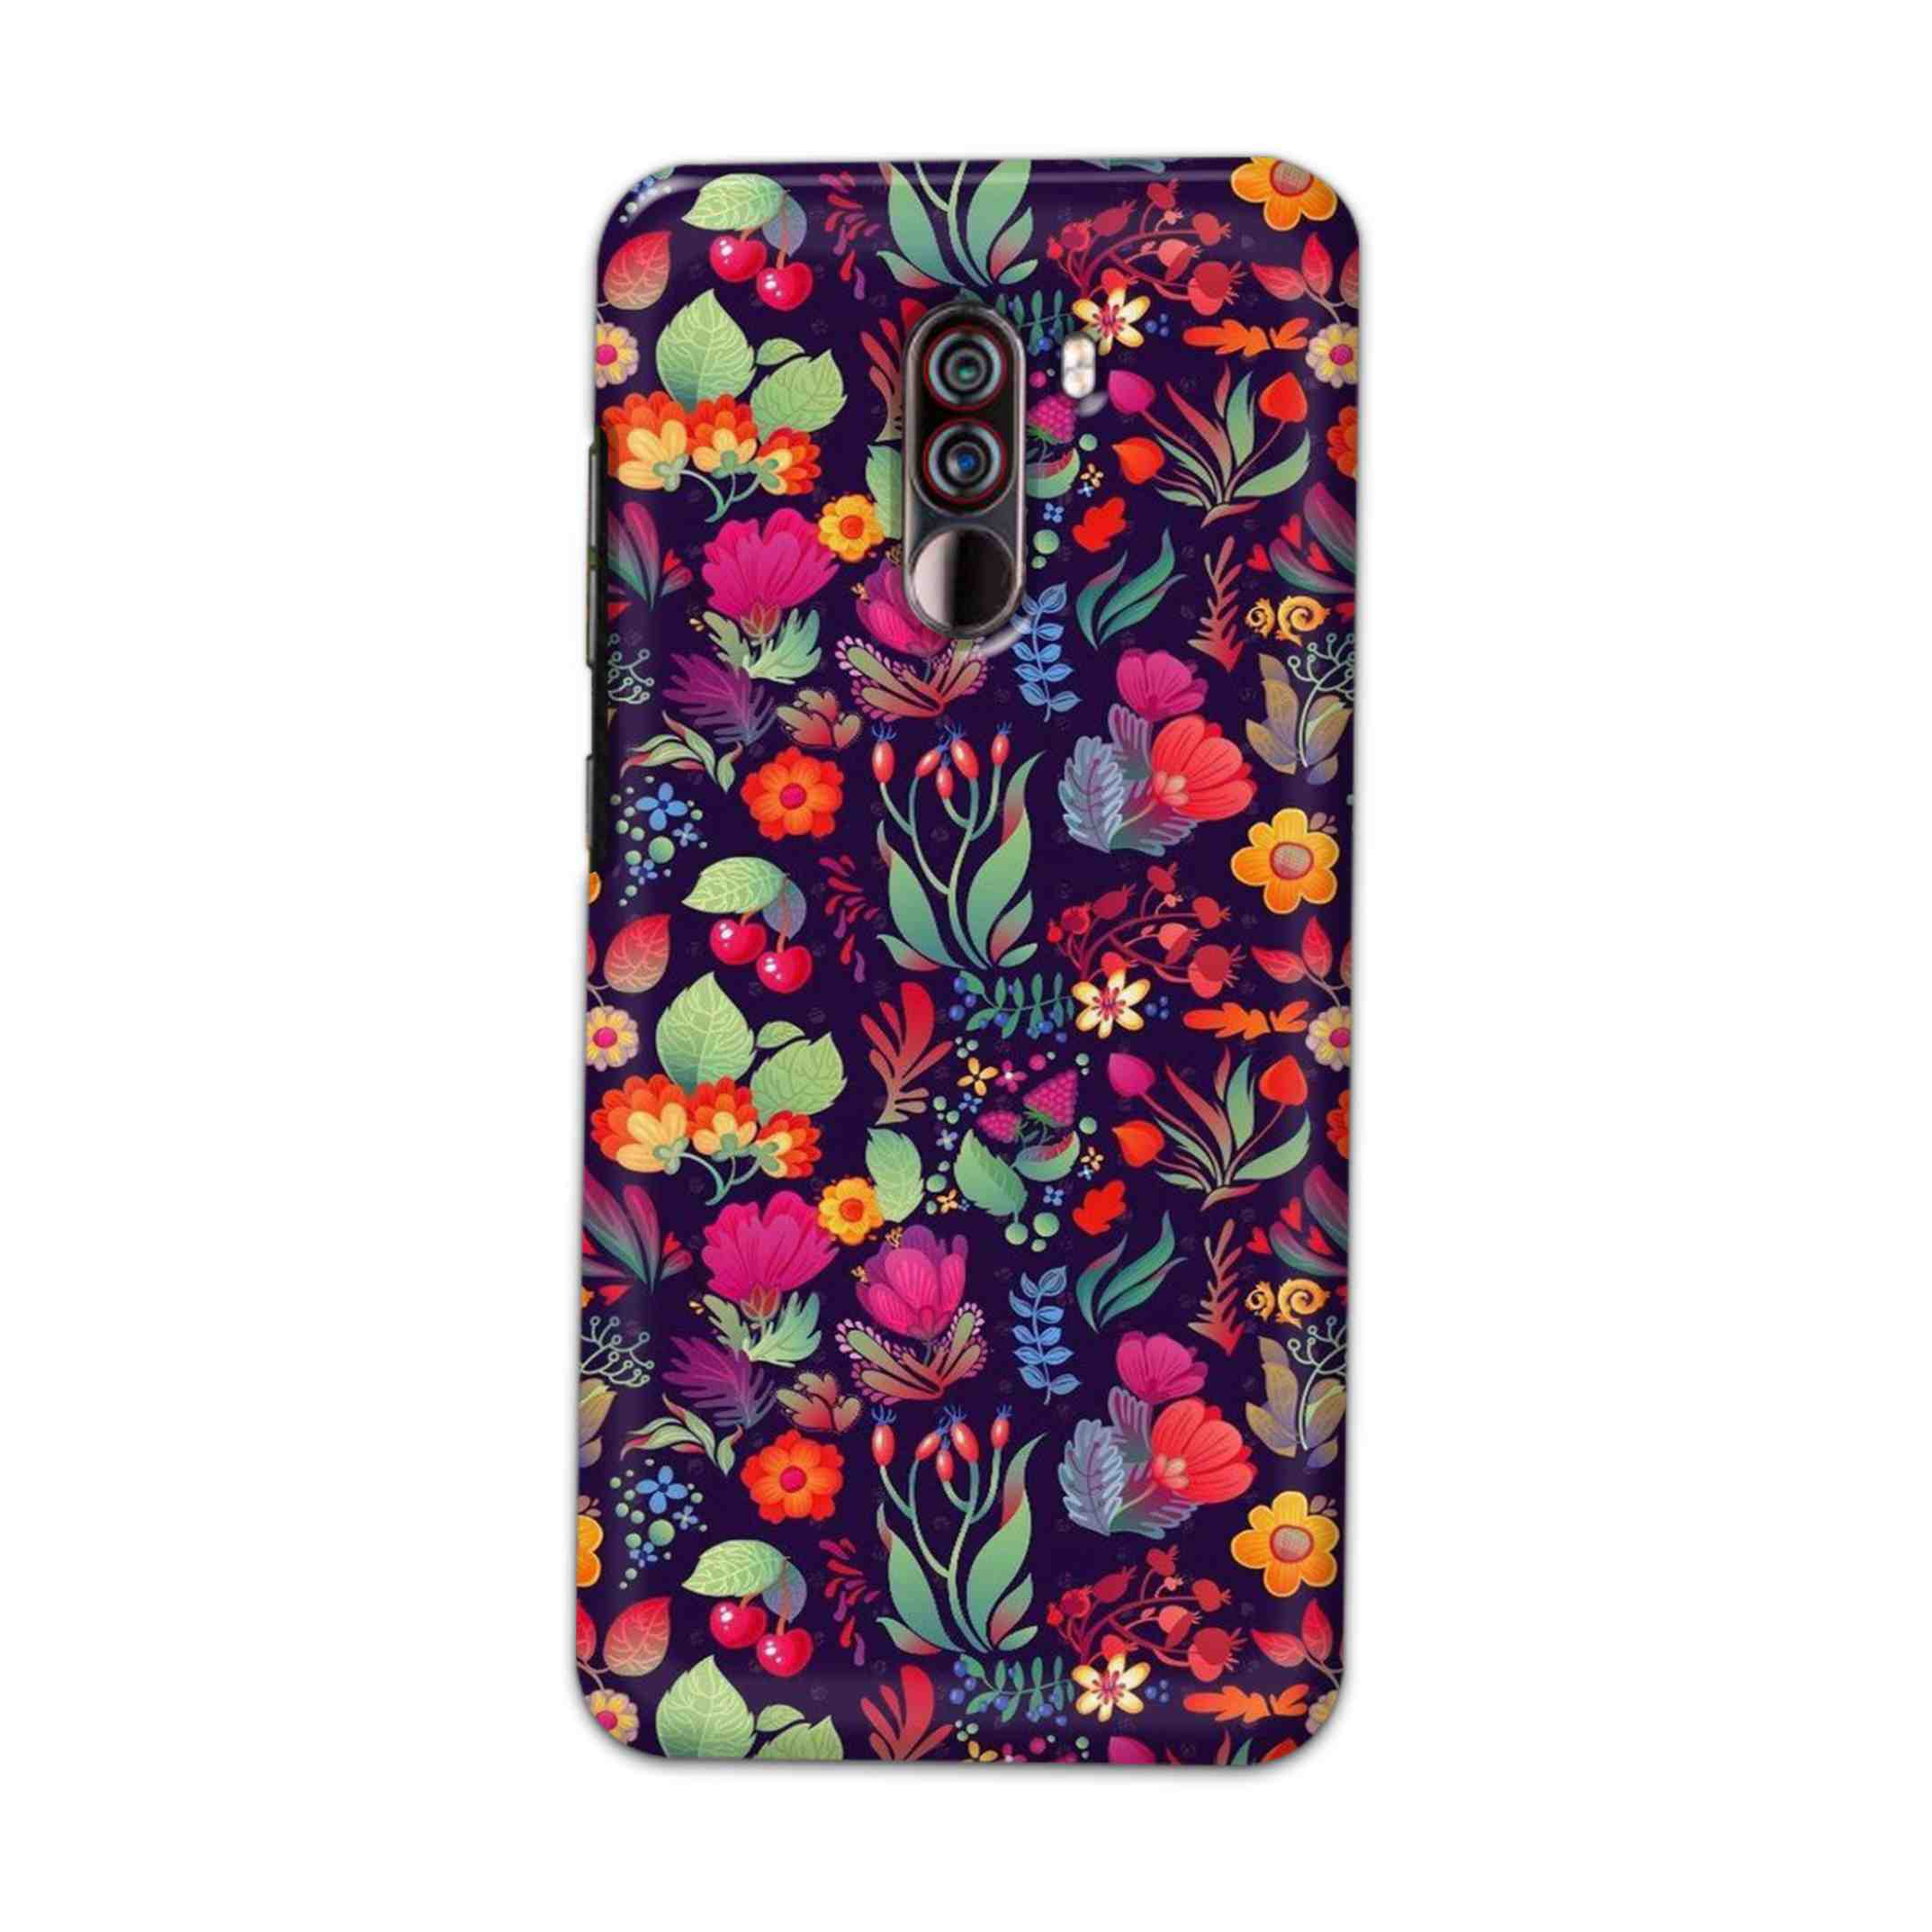 Buy Fruits Flower Hard Back Mobile Phone Case Cover For Xiaomi Pocophone F1 Online